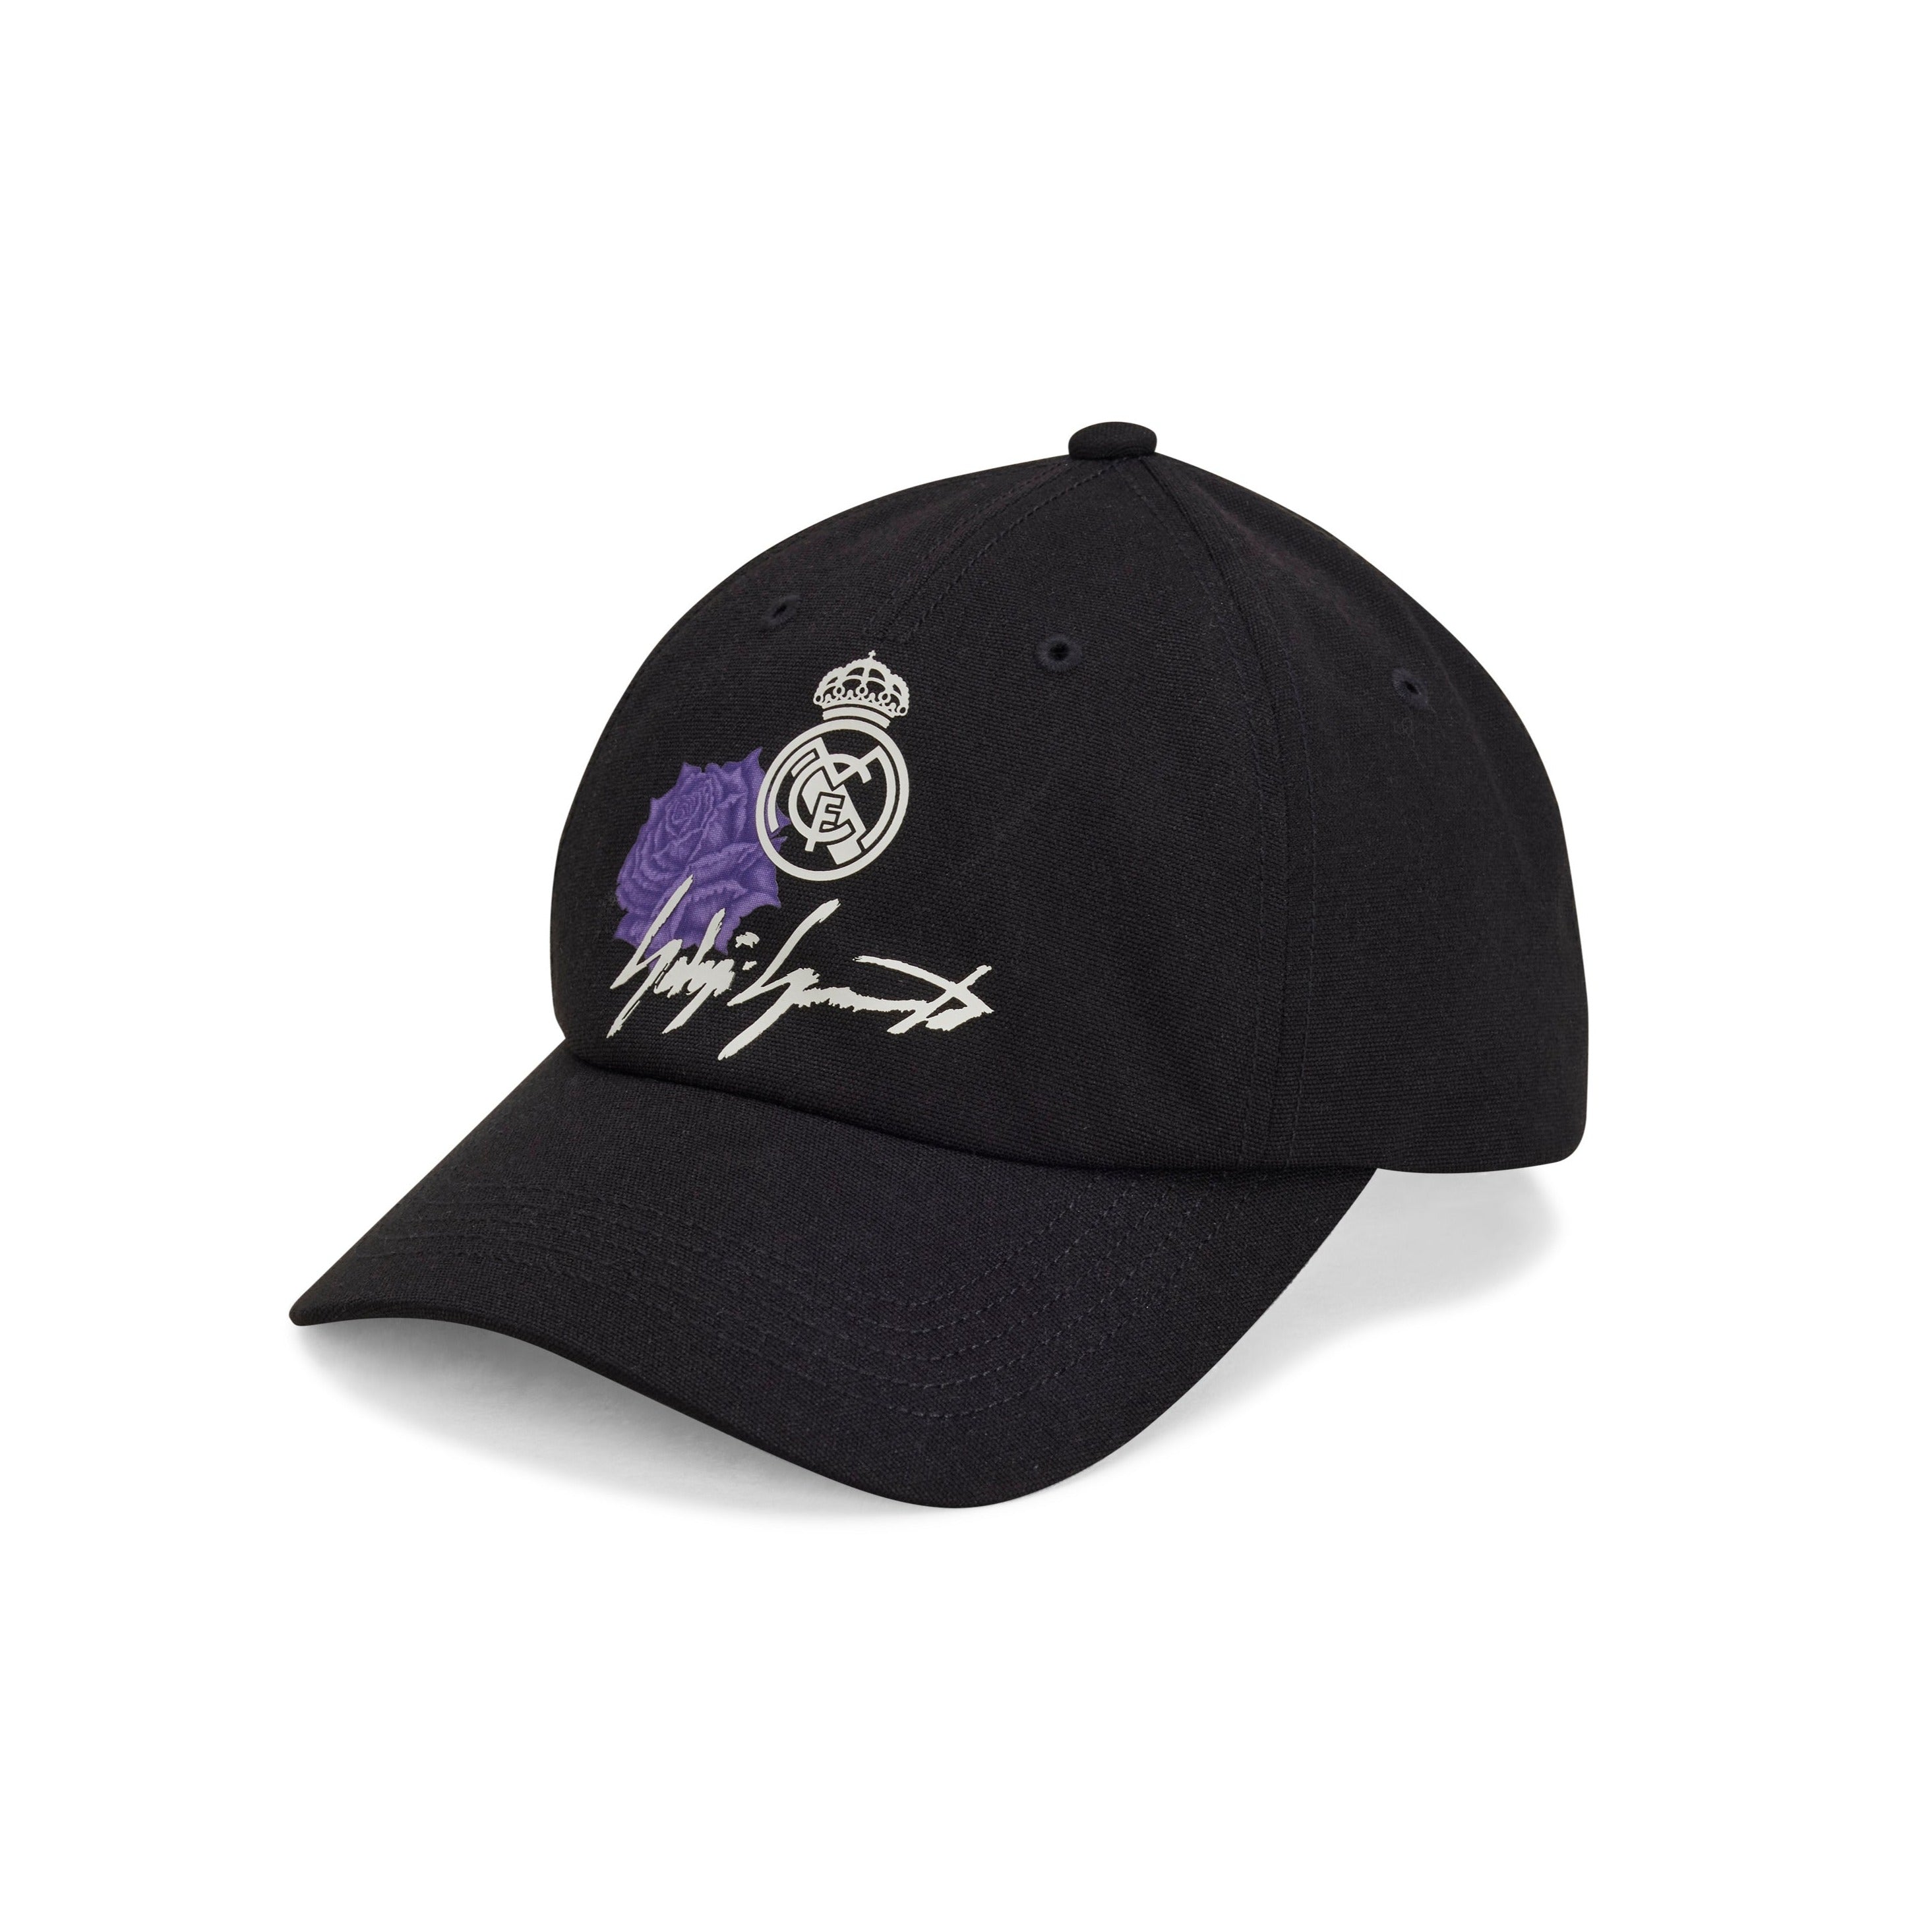 Y-3 REAL MADRID CAP – Why are you here?